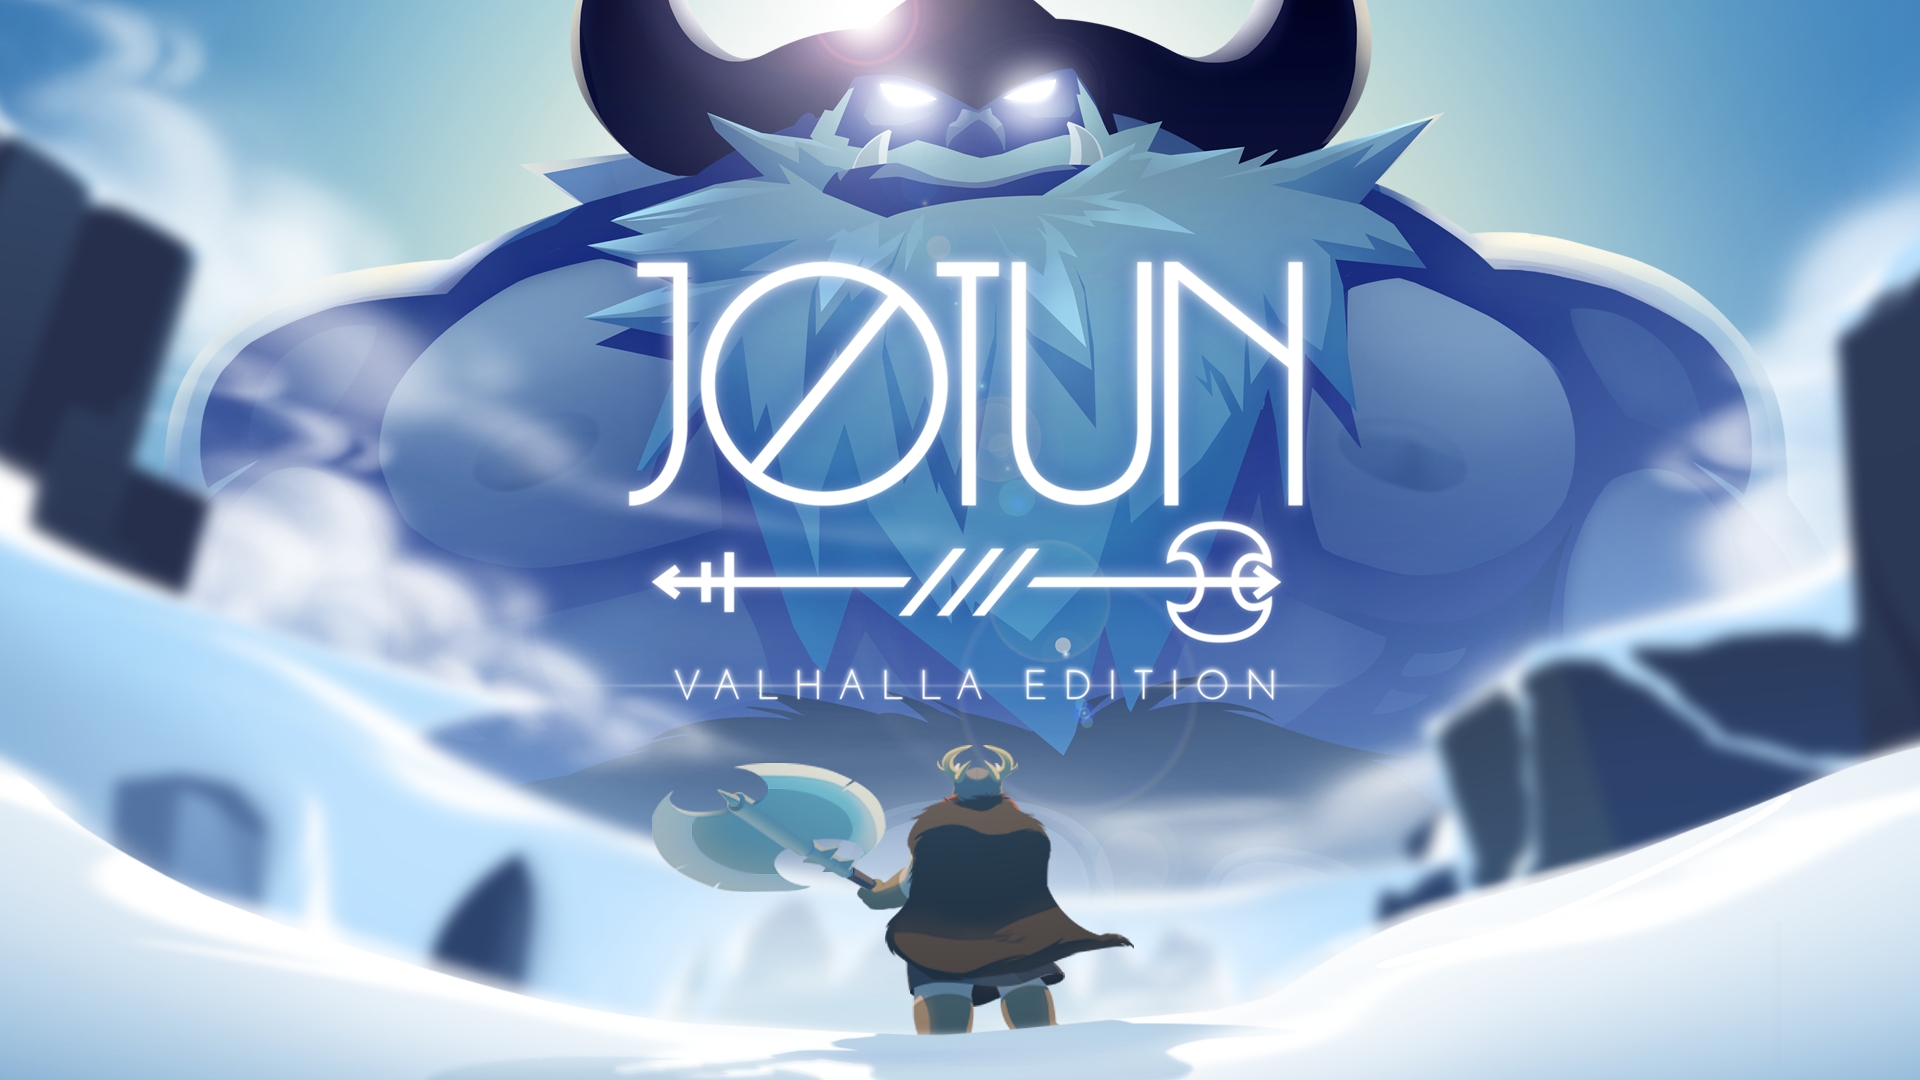 Jotun Valhalla Edition Gets Ps4 Xbox One And Wii U Release Date